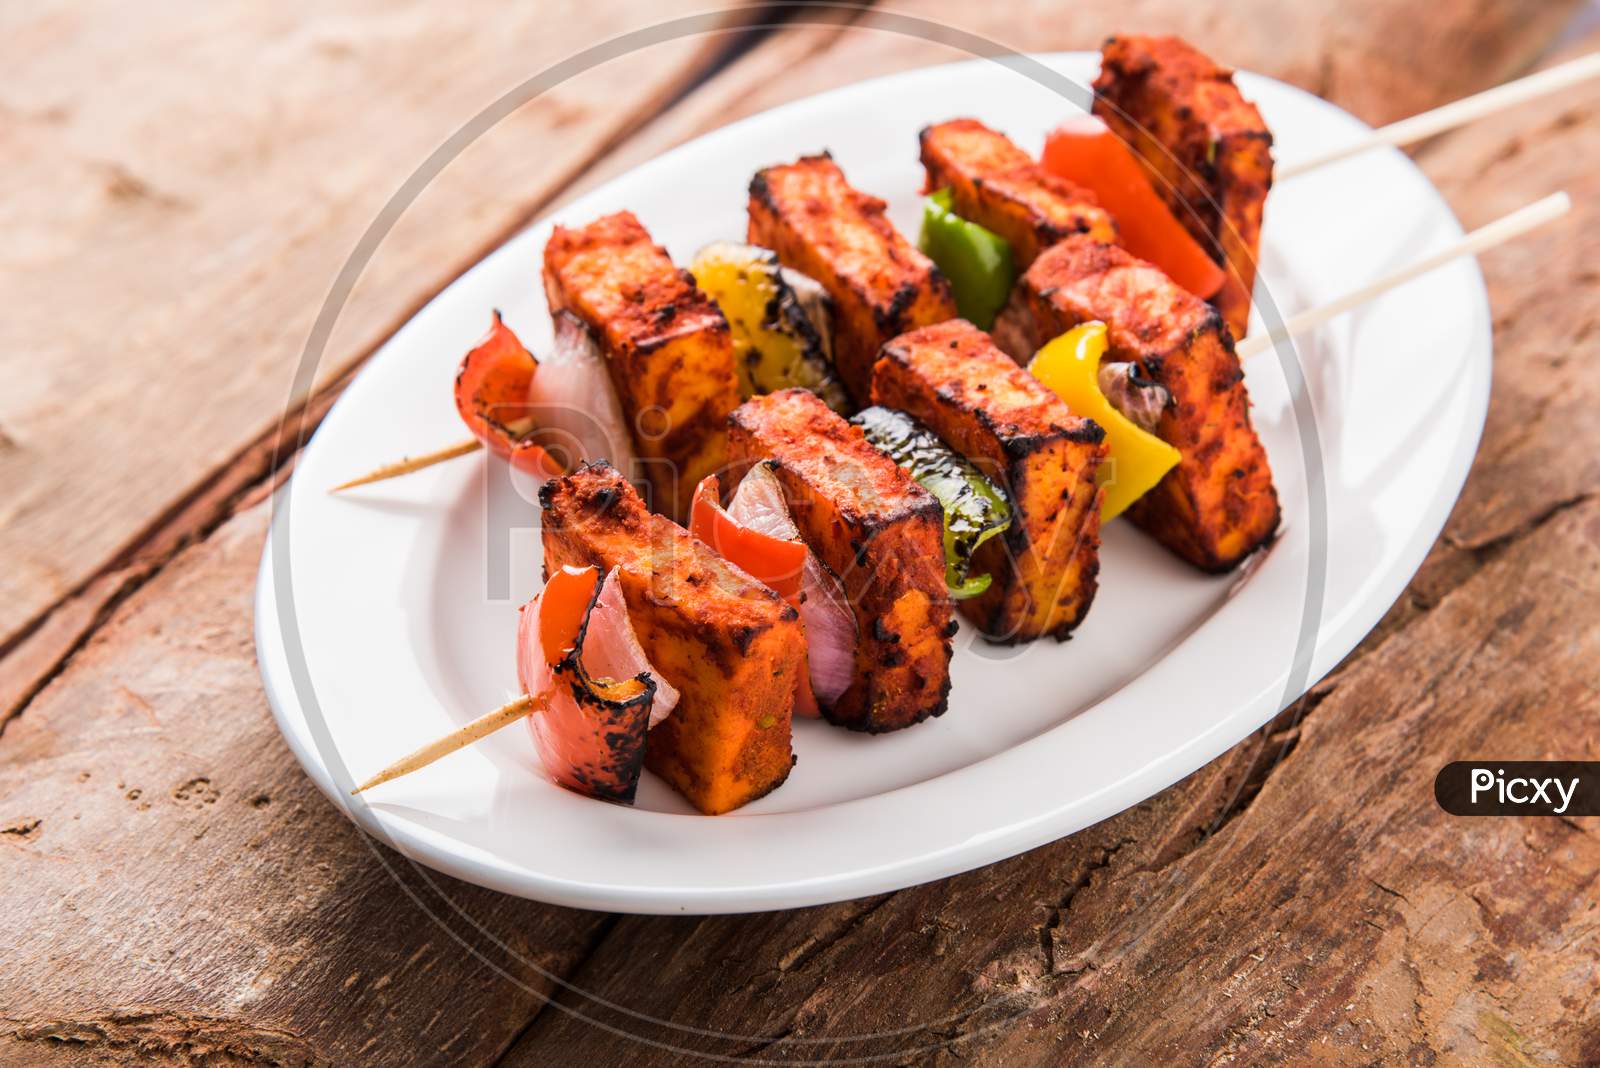 Chilli Paneer Tikka Kabab in red sauce made in Barbeque or Tandoor